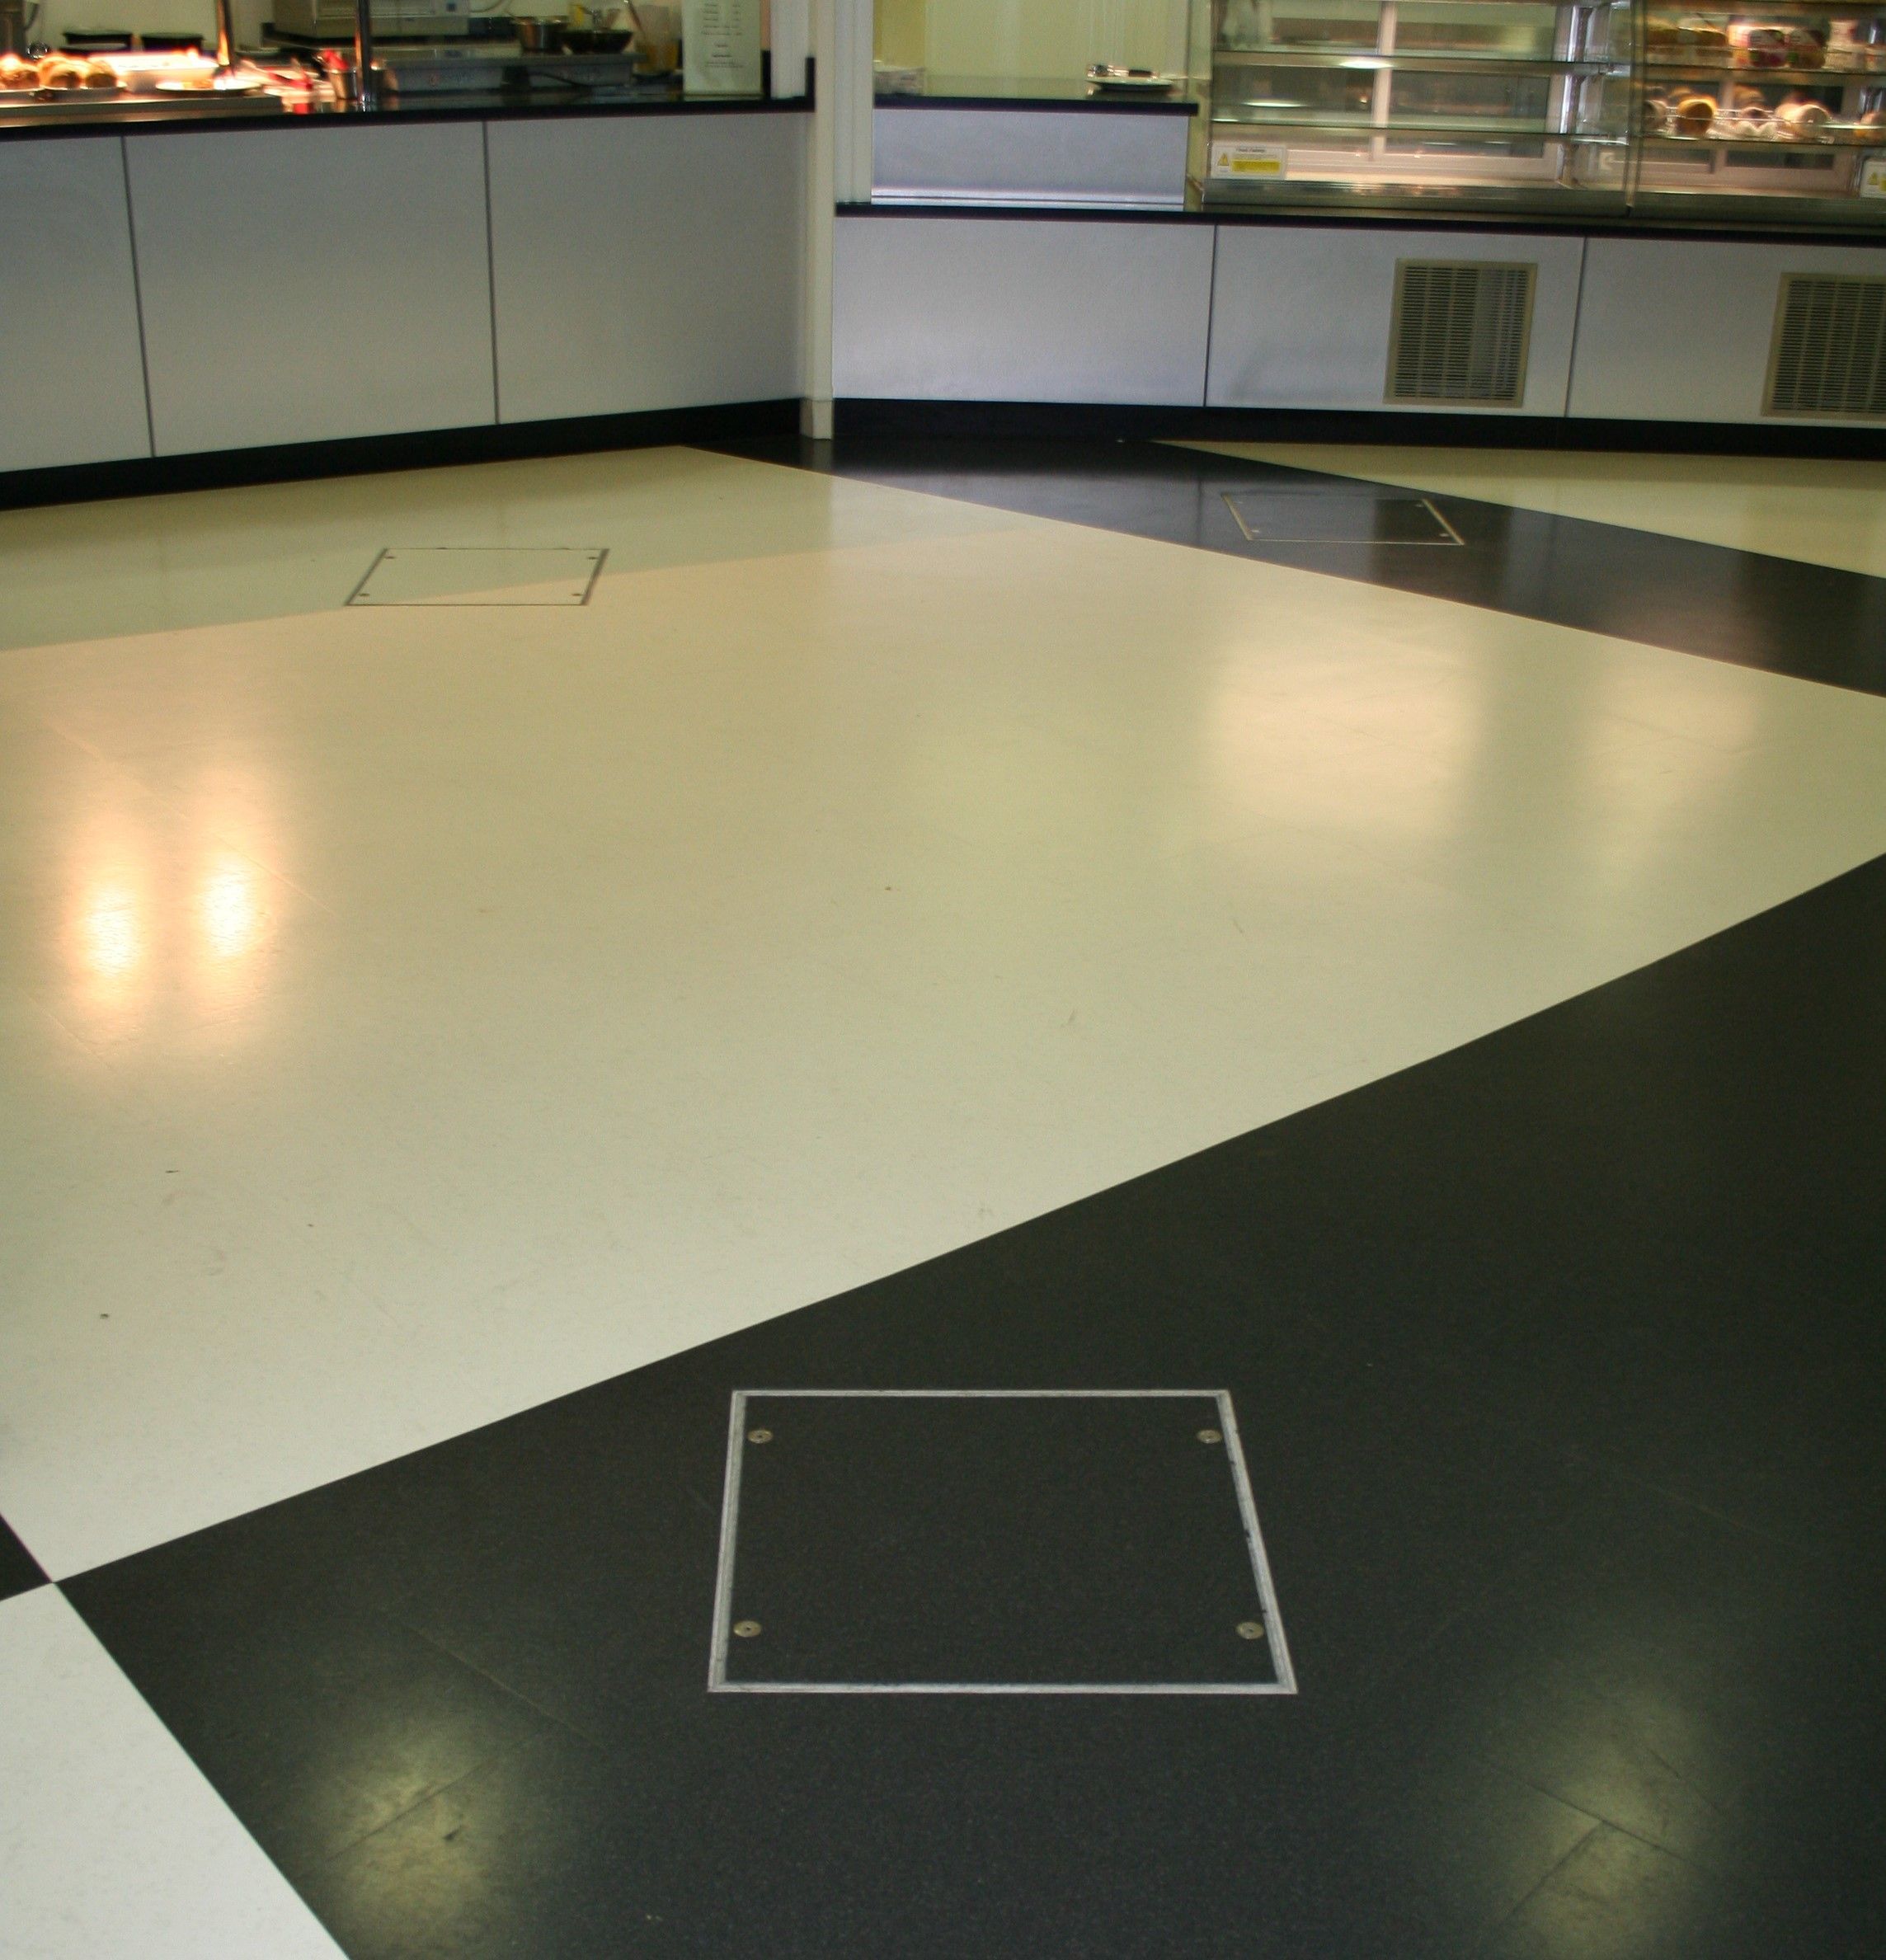 Howe Green floor access covers are fit for royalty at Queen’s Hospital, Romford